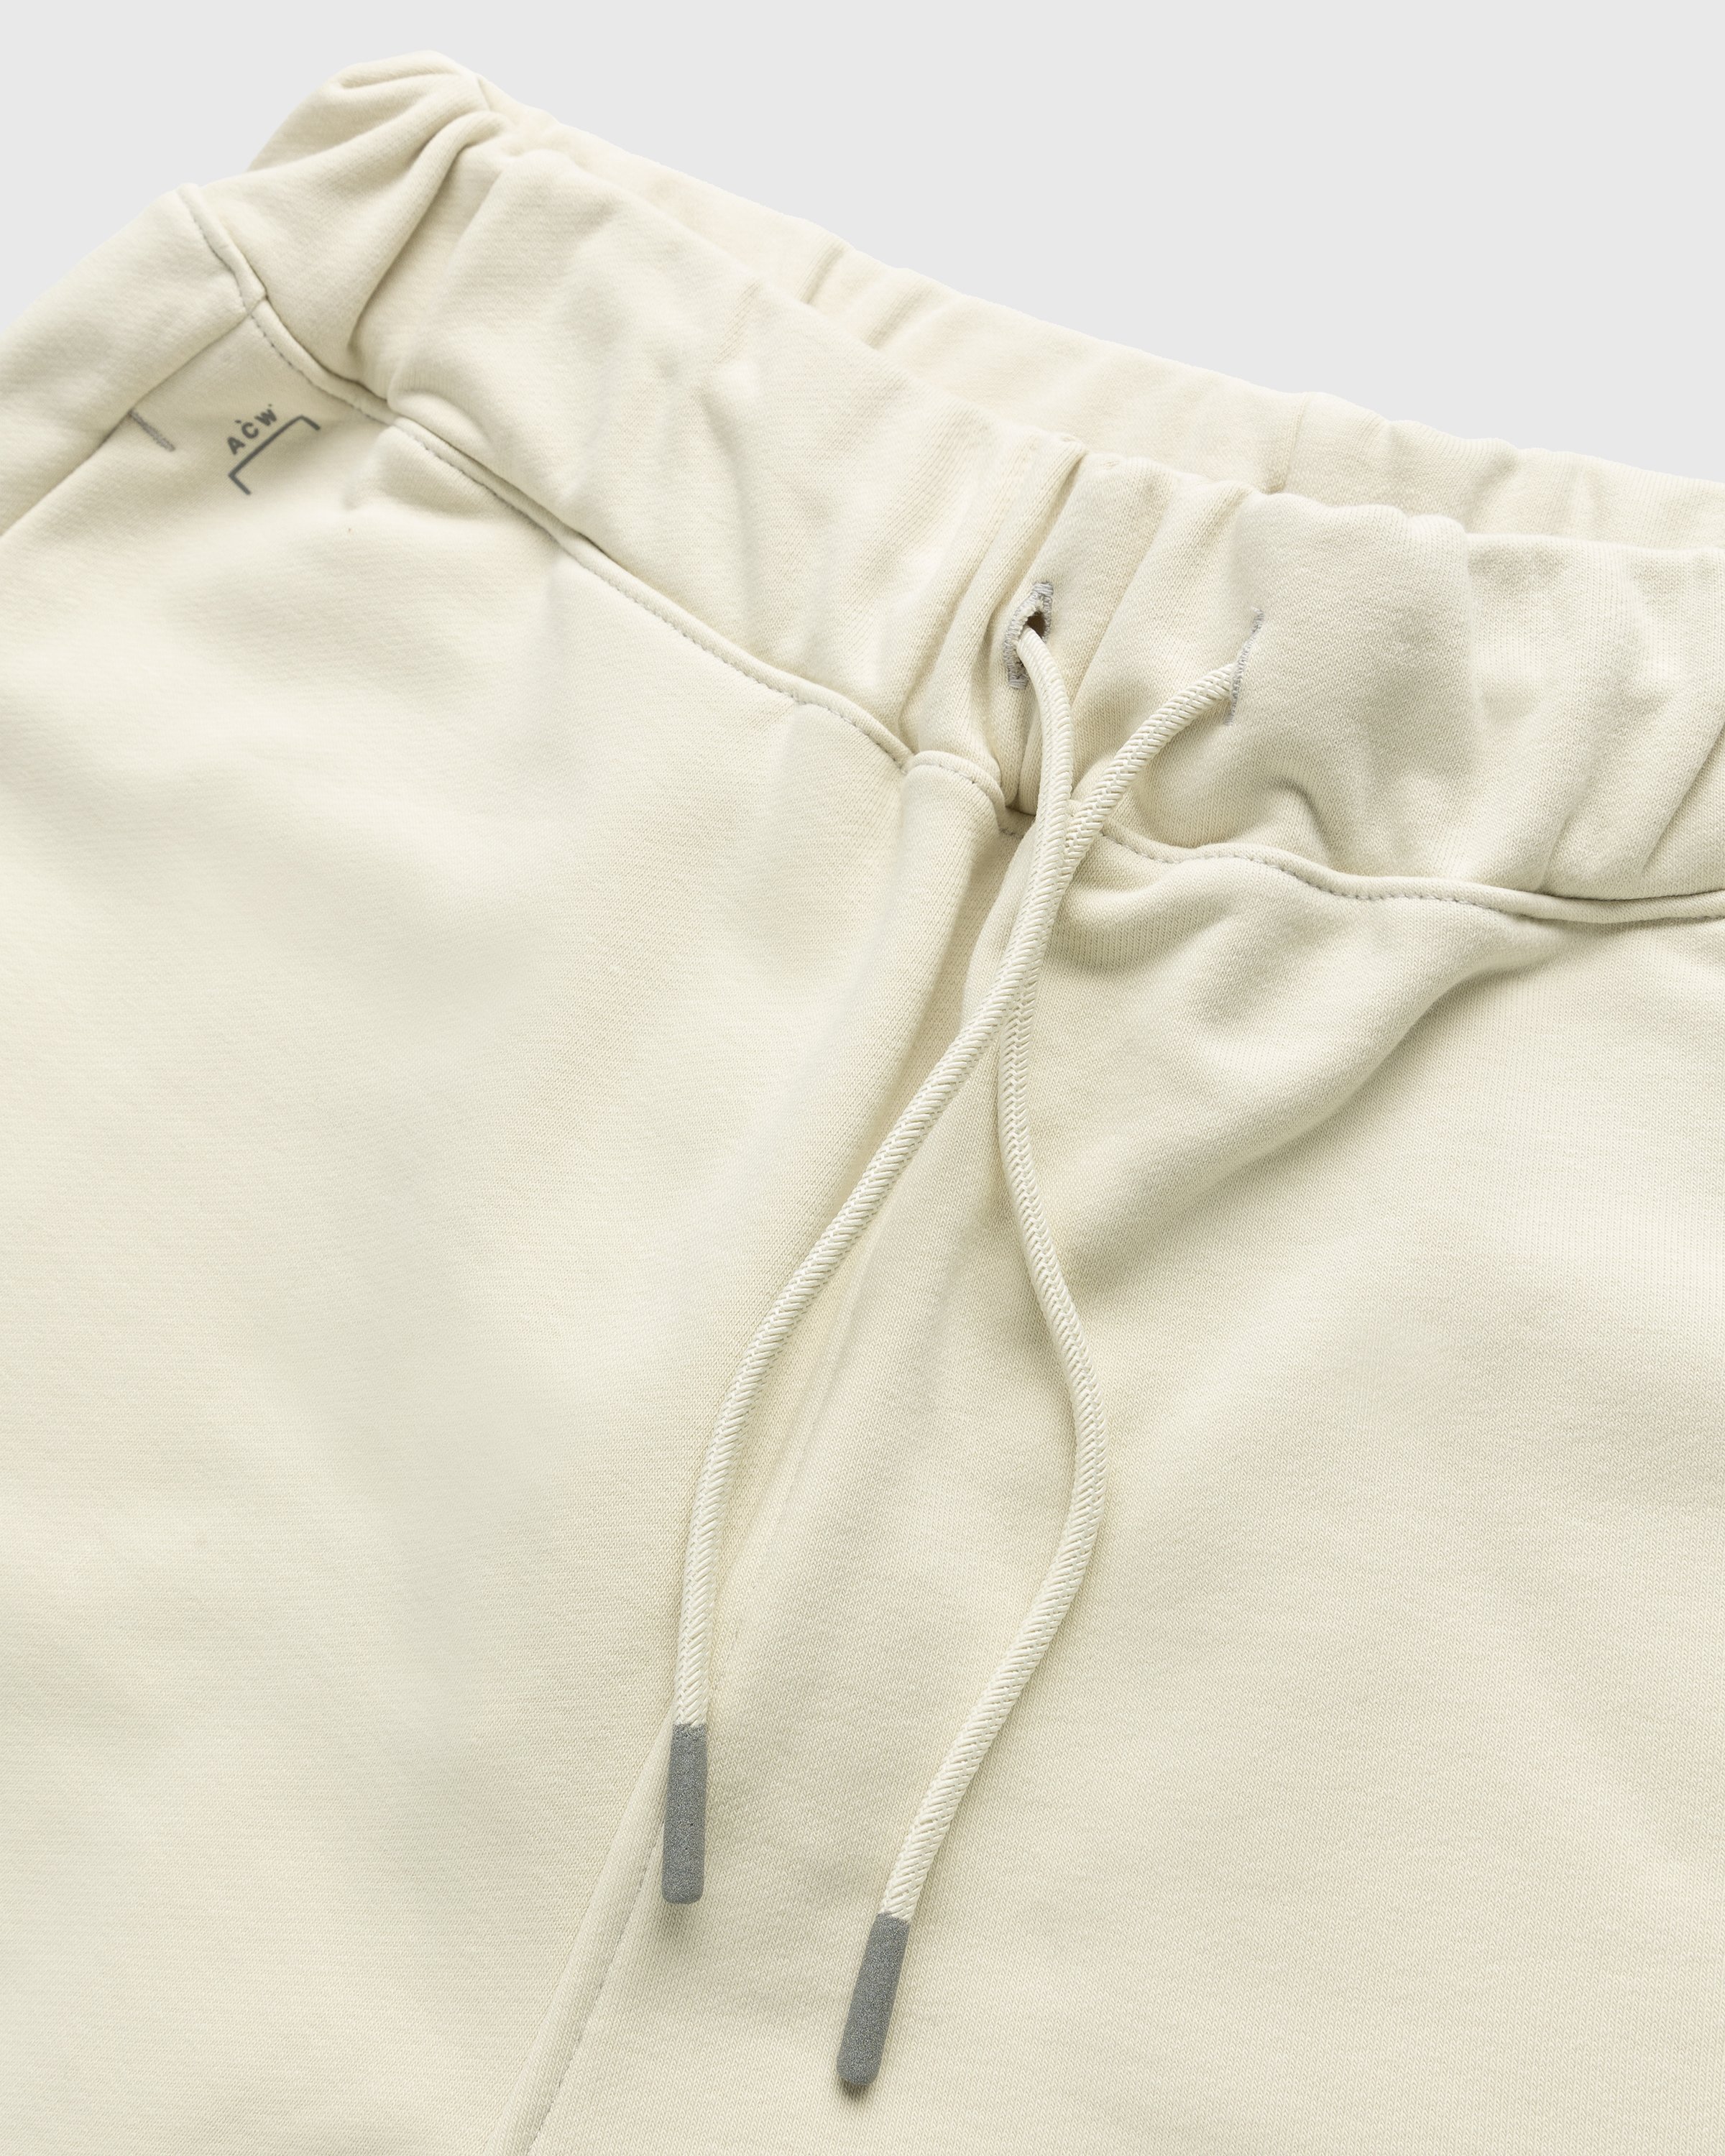 Converse x A-Cold-Wall* - Reflective Short Bone White - Clothing - White - Image 4